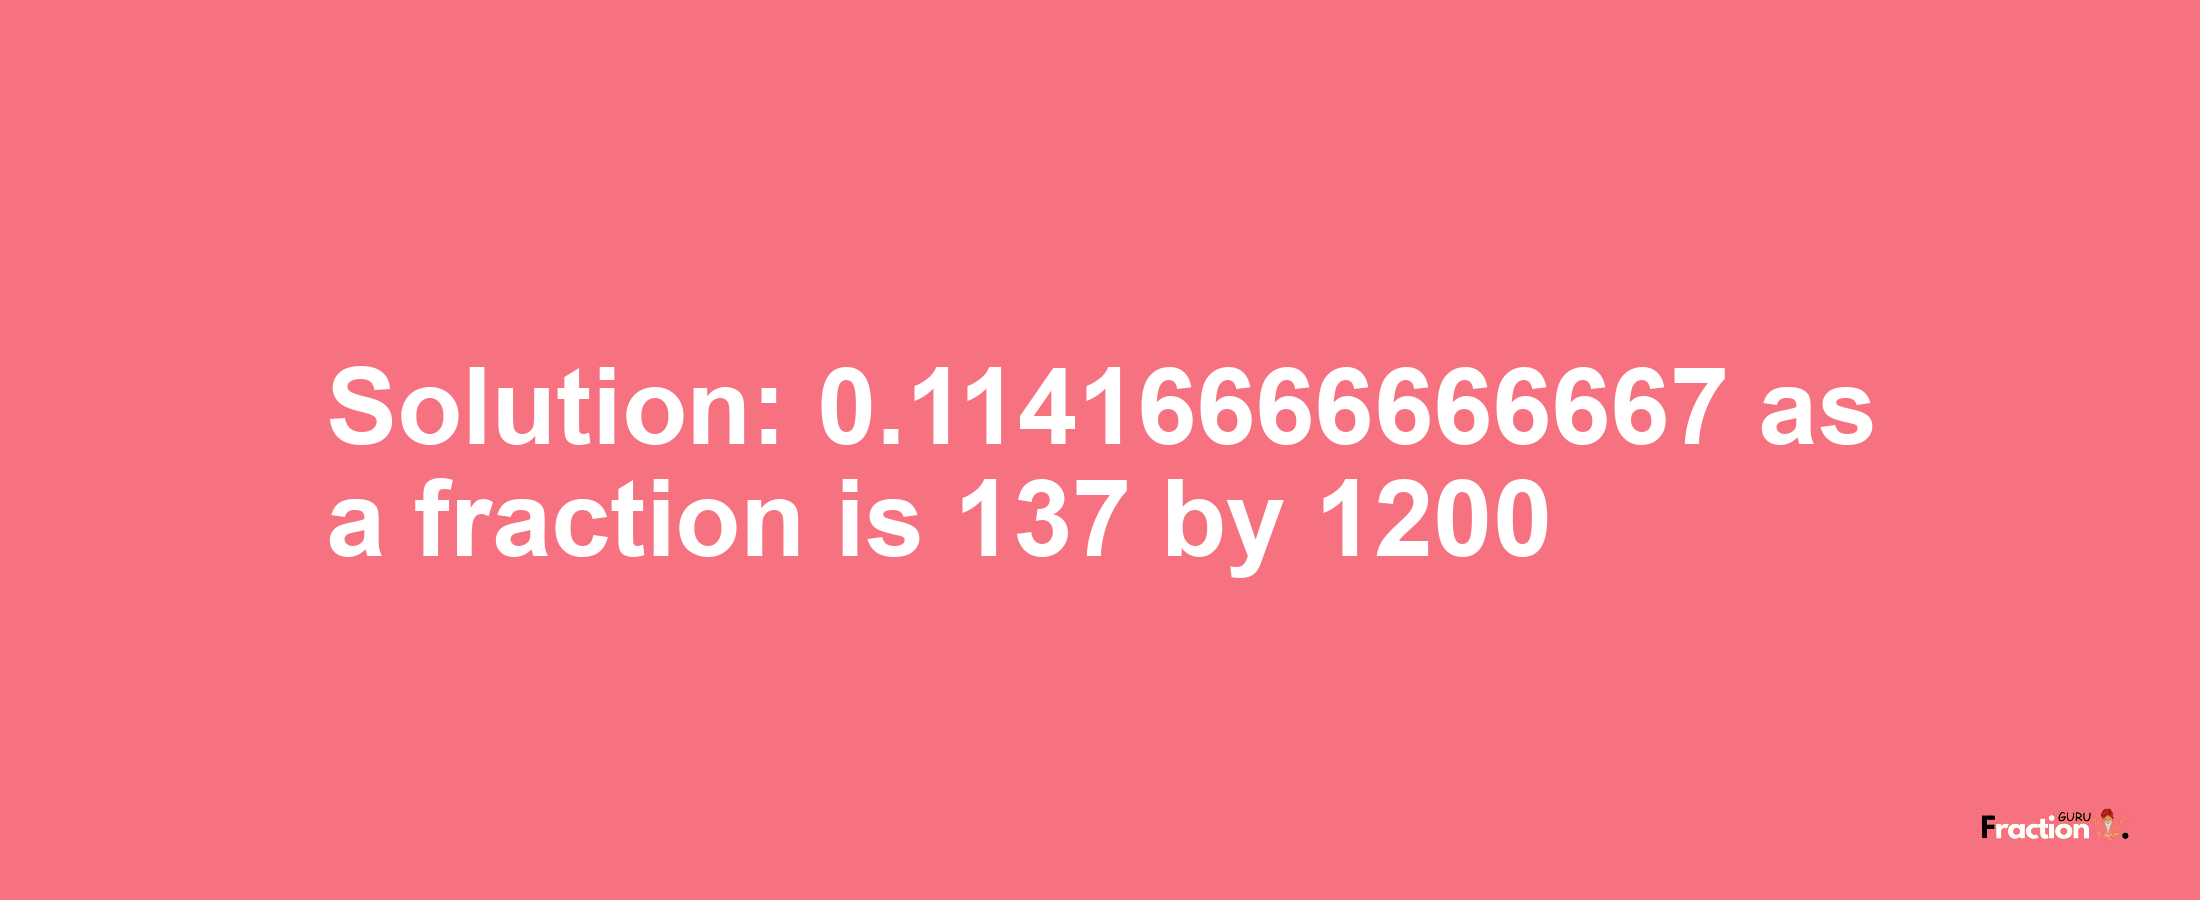 Solution:0.11416666666667 as a fraction is 137/1200